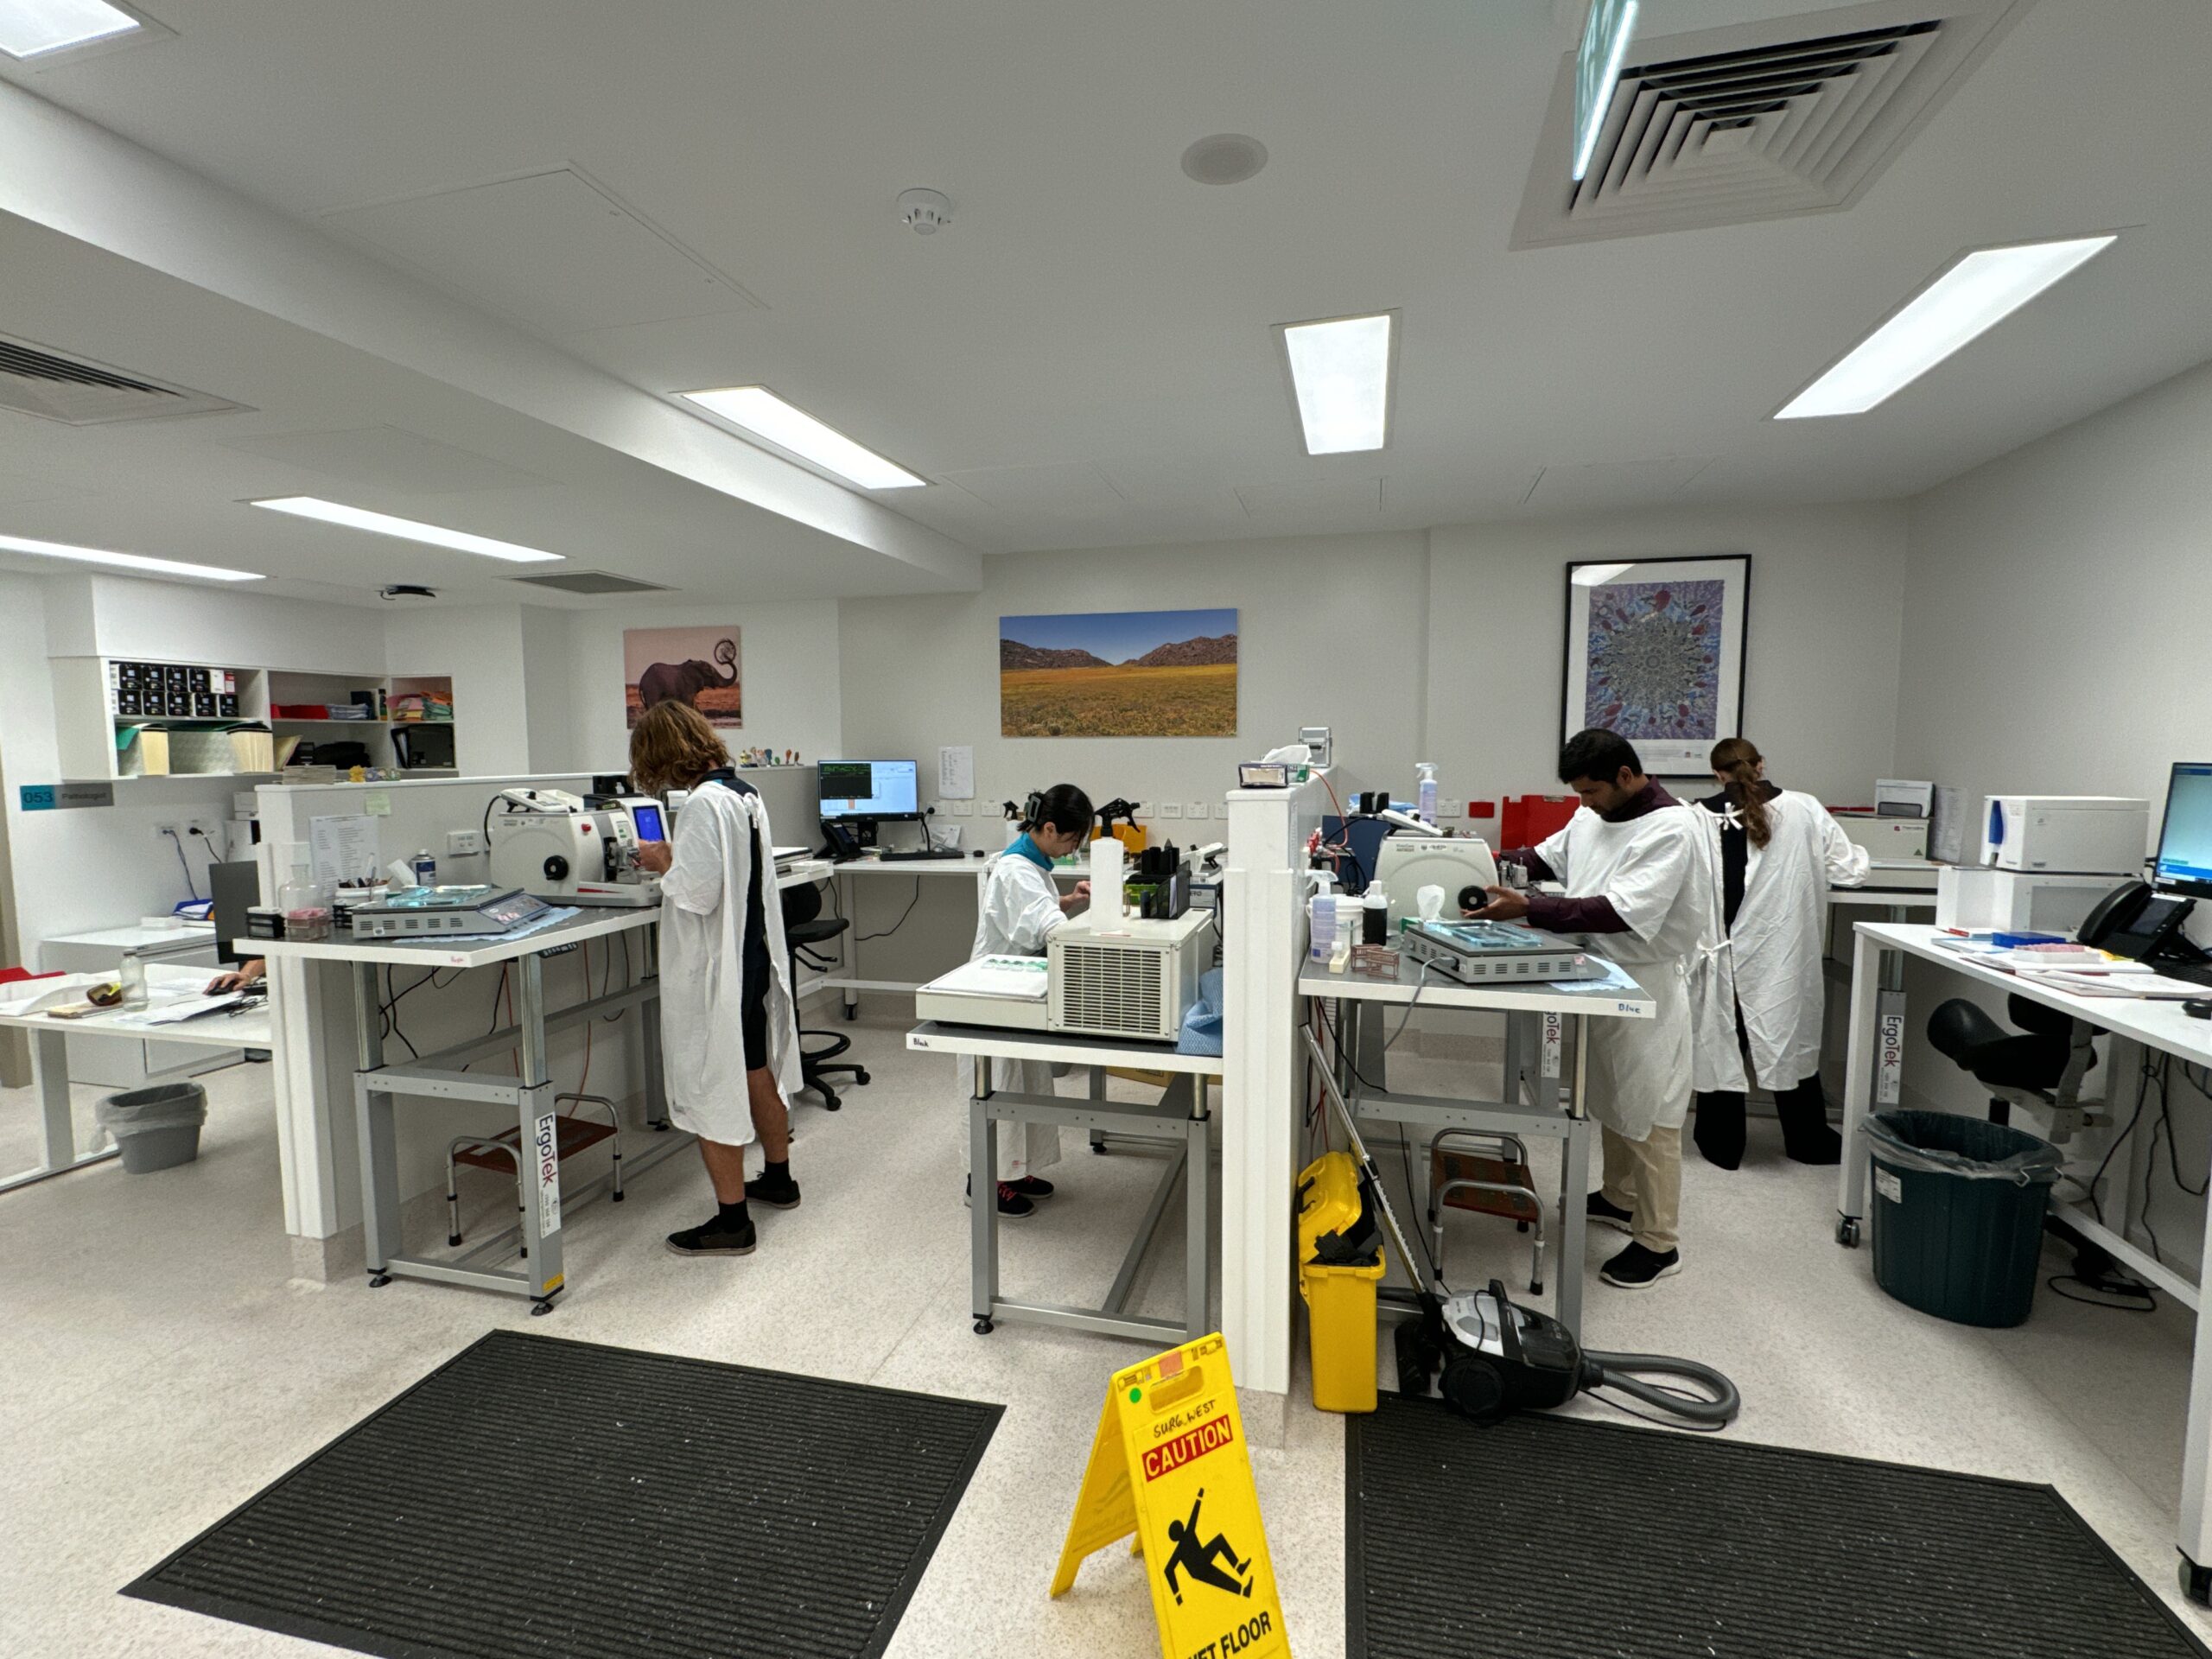 A group of people wearing lab coats working in a laboratory.